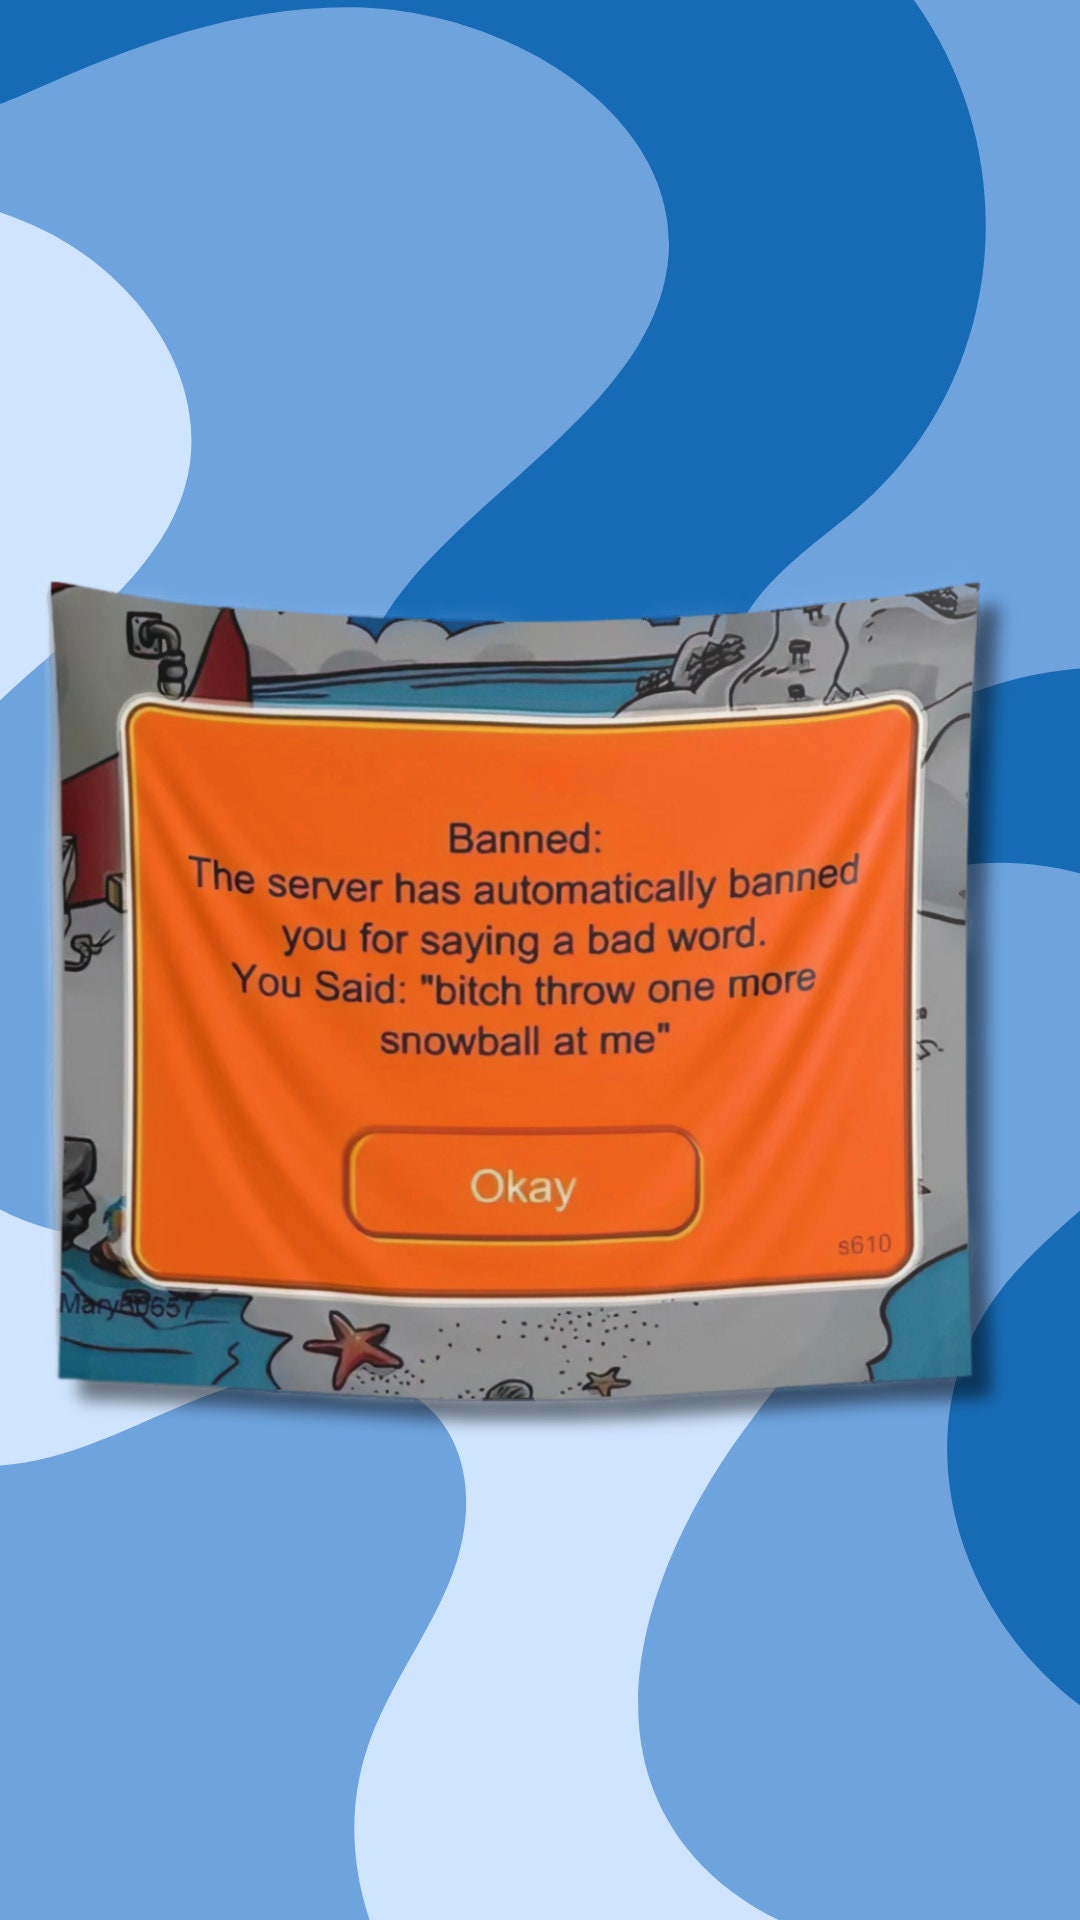 Club Penguin Banned Tapestry Funny Tapestries Meme Tapestry 